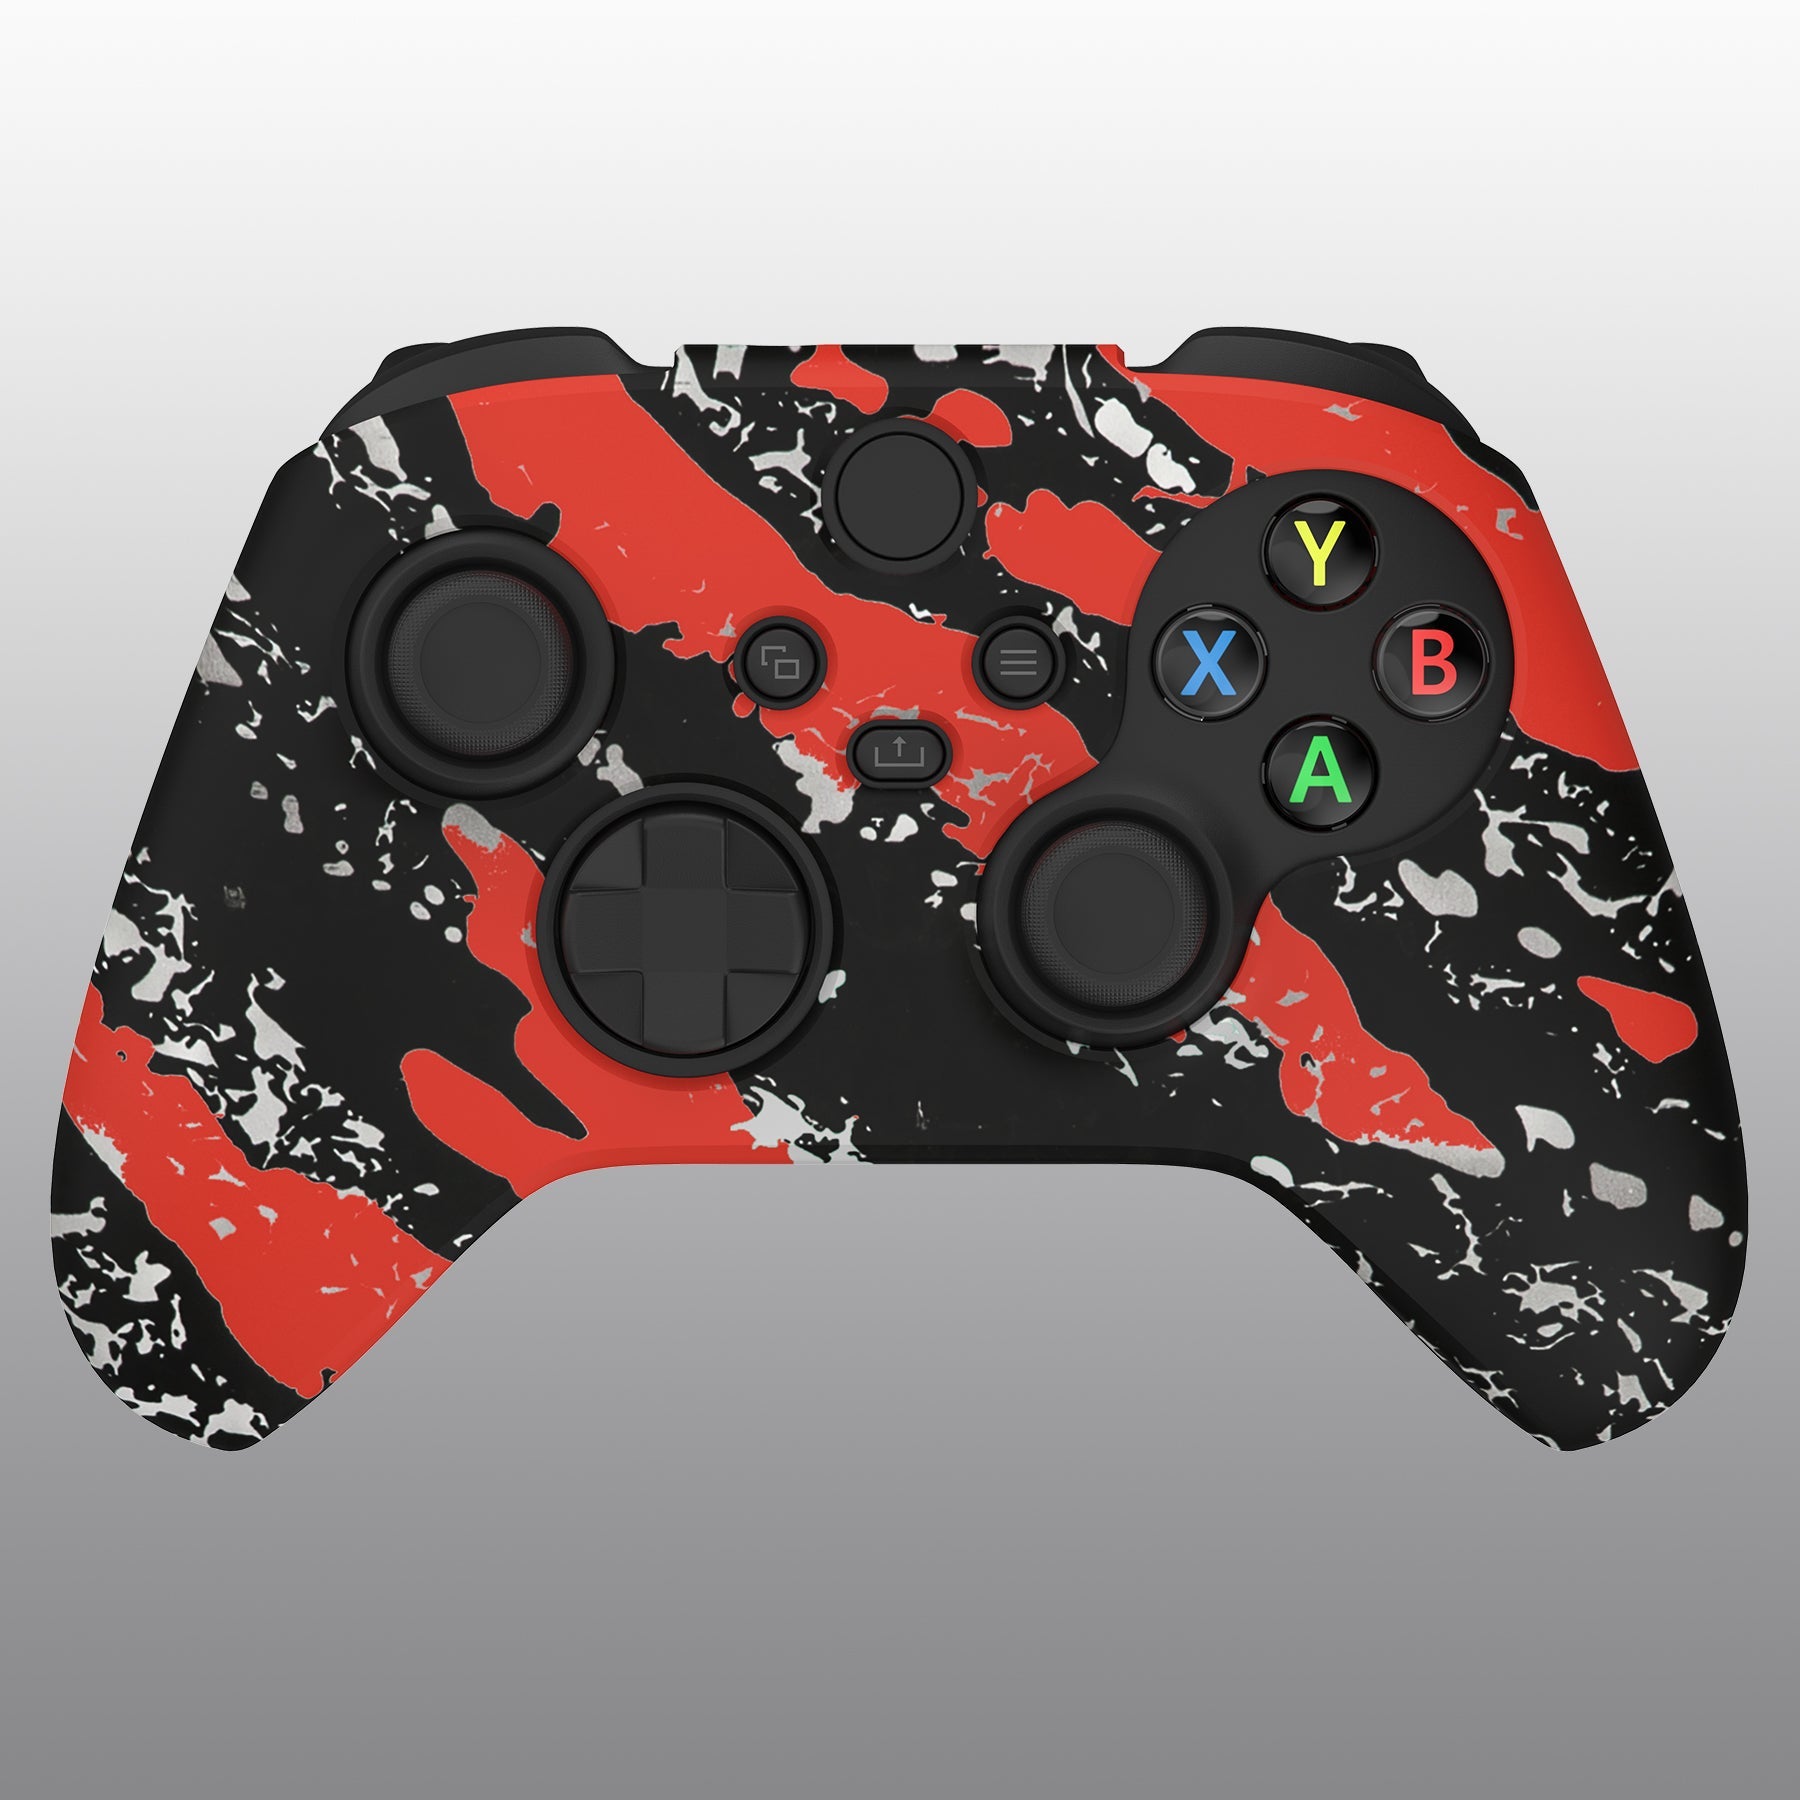 PlayVital Water Transfer Printing Red Splash Pattern Silicone Cover Skin for Xbox Series X/S Controller, Soft Rubber Case Protector for Xbox Series X/S, Xbox Core Controller wtih 6 Thumb Grip Caps - BLX3018 PlayVital